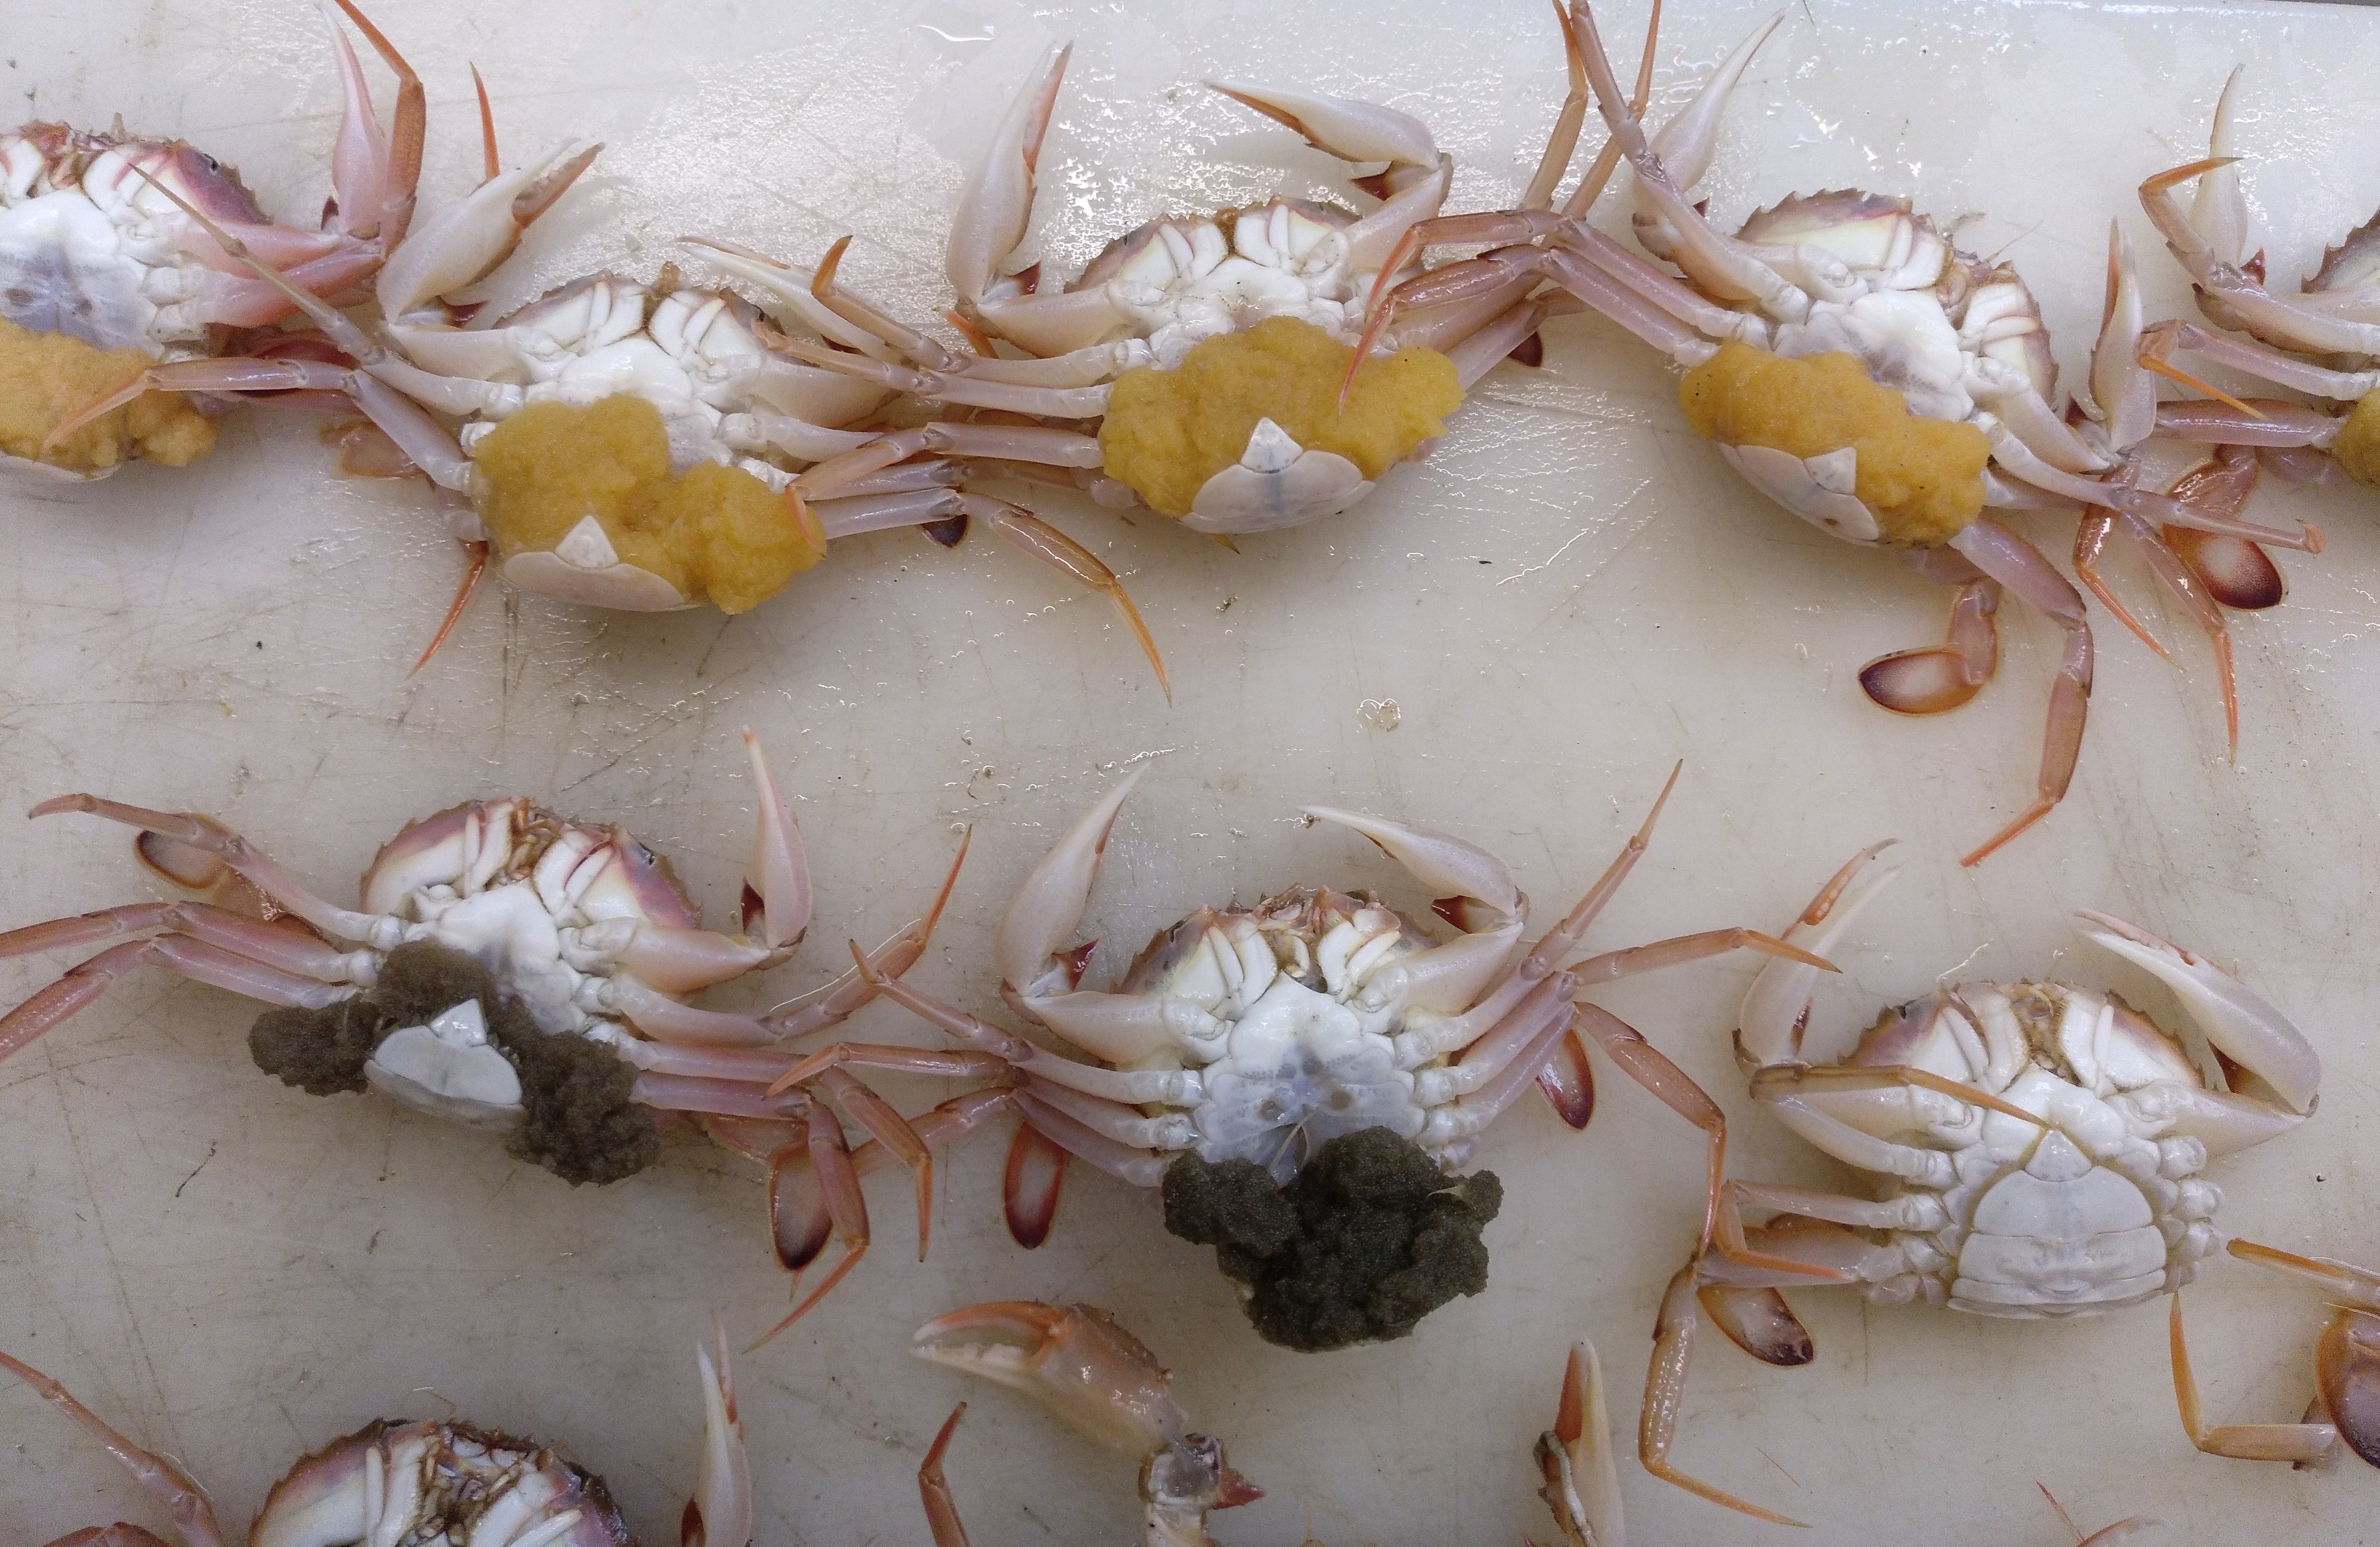 The team focused the study on the harbour crab (<i>Liocarcinus depurator</i>), a decapod crustacean of commercial interest.